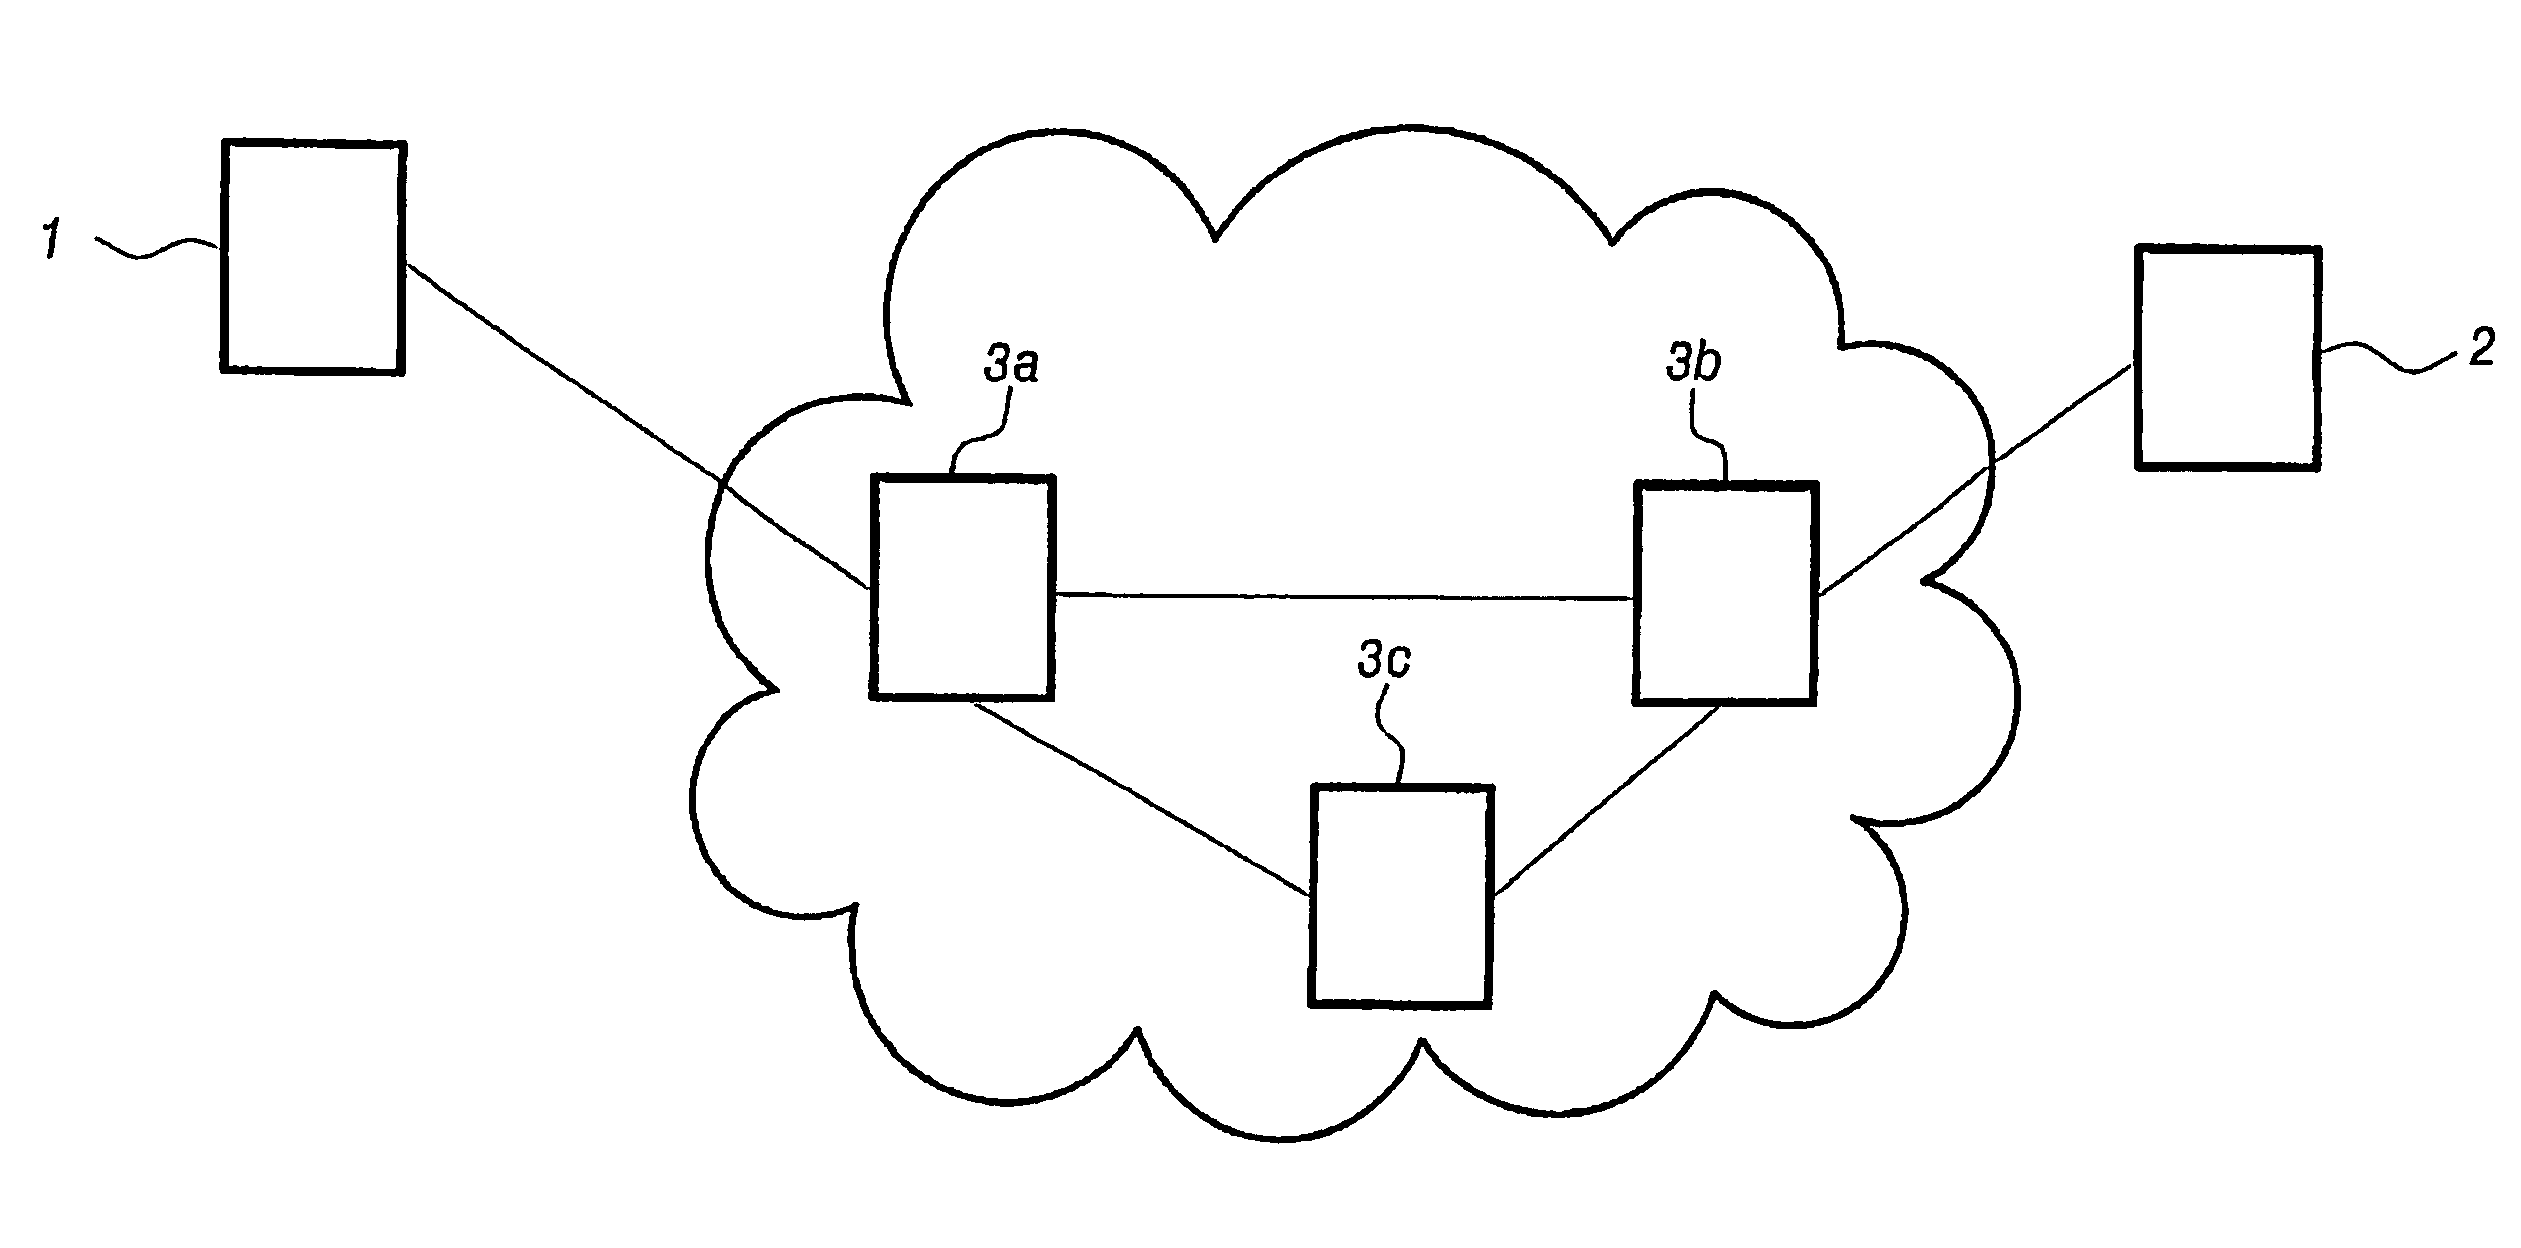 Method for selecting packets in a data transmission network